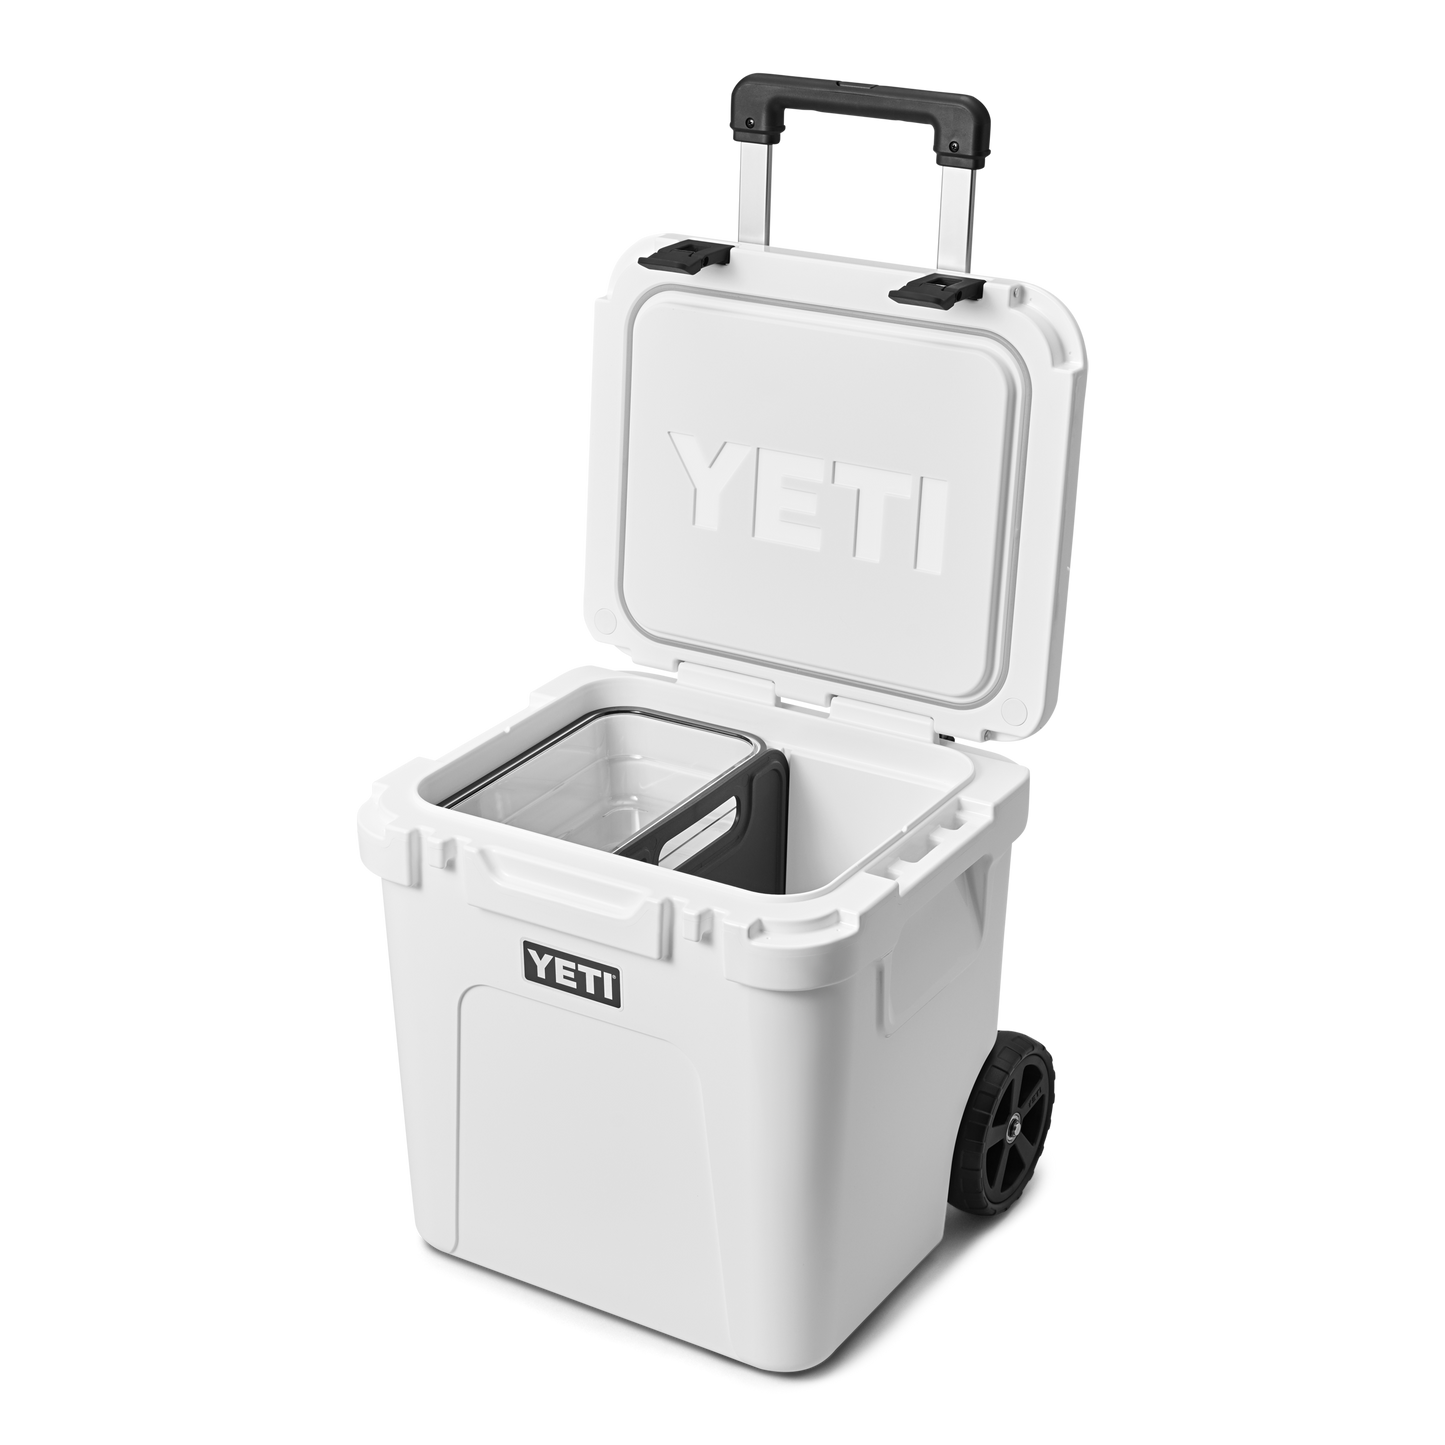 YETI Roadie 48 Wheeled Cool Box in white with lid up